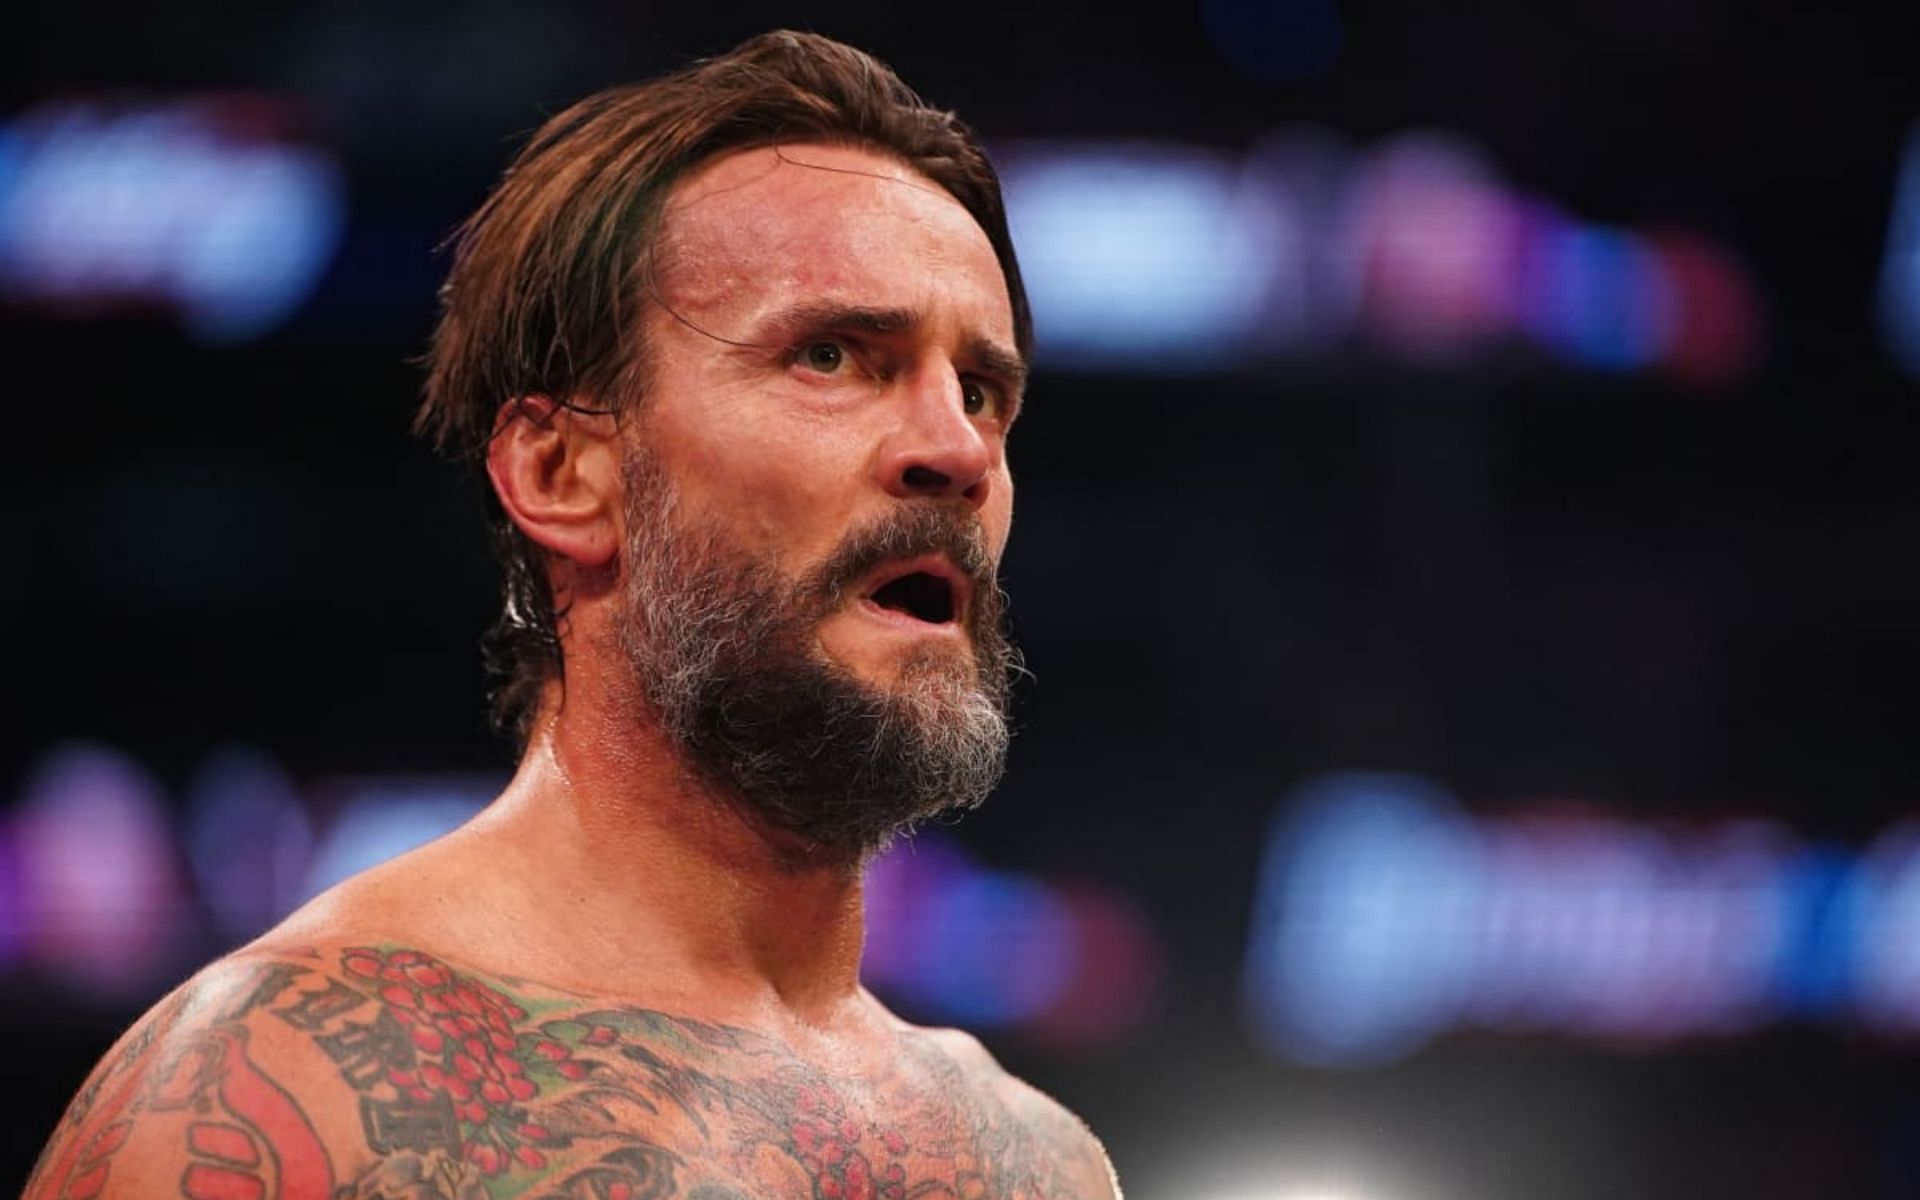 The 2-time AEW World Champion was reportedly interested in a WWE return